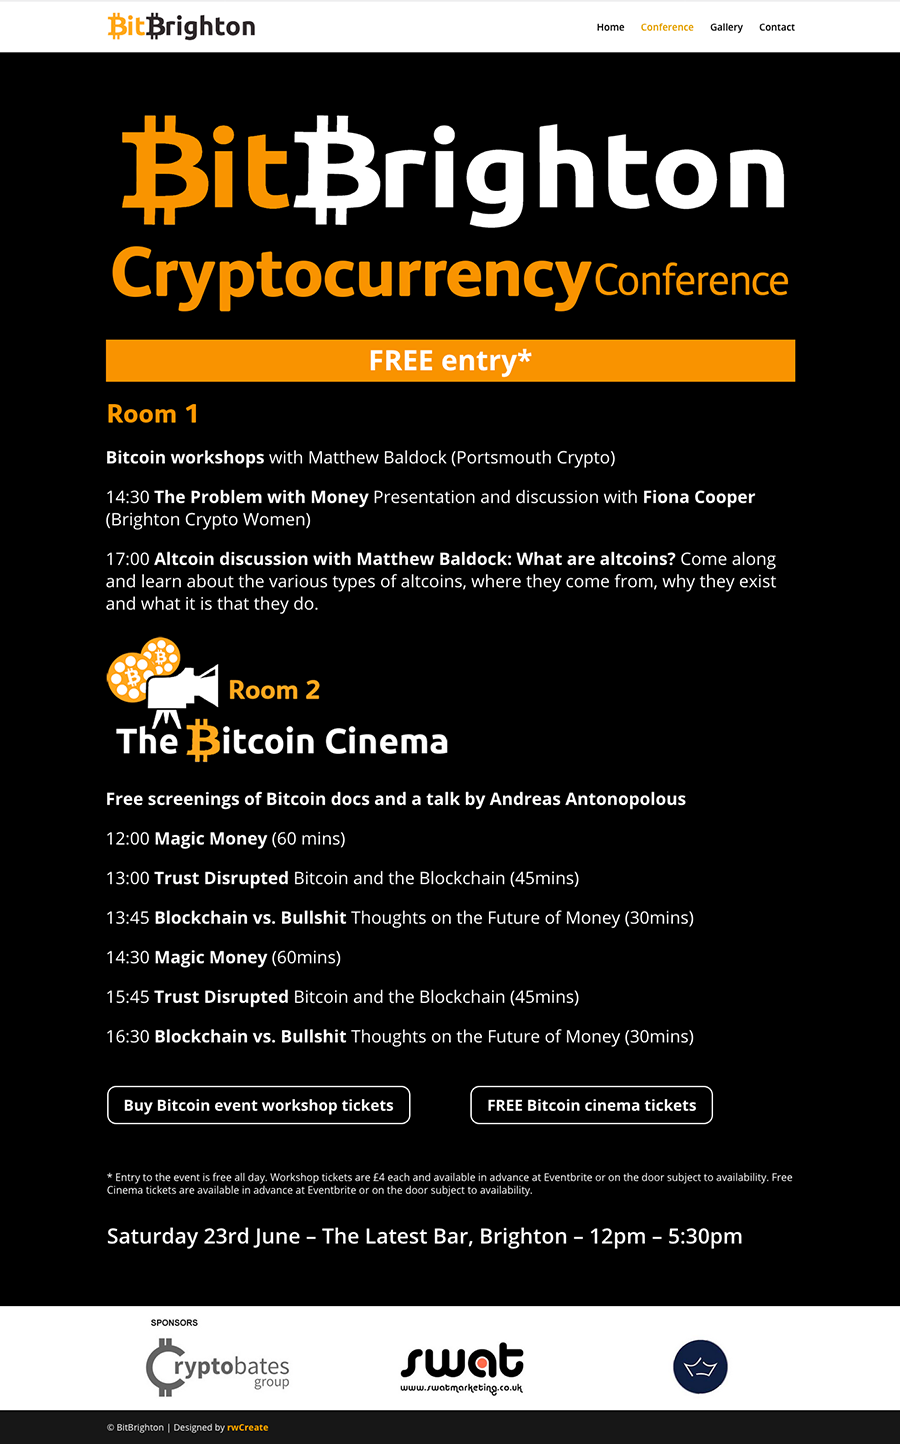 BitBrighton conference page